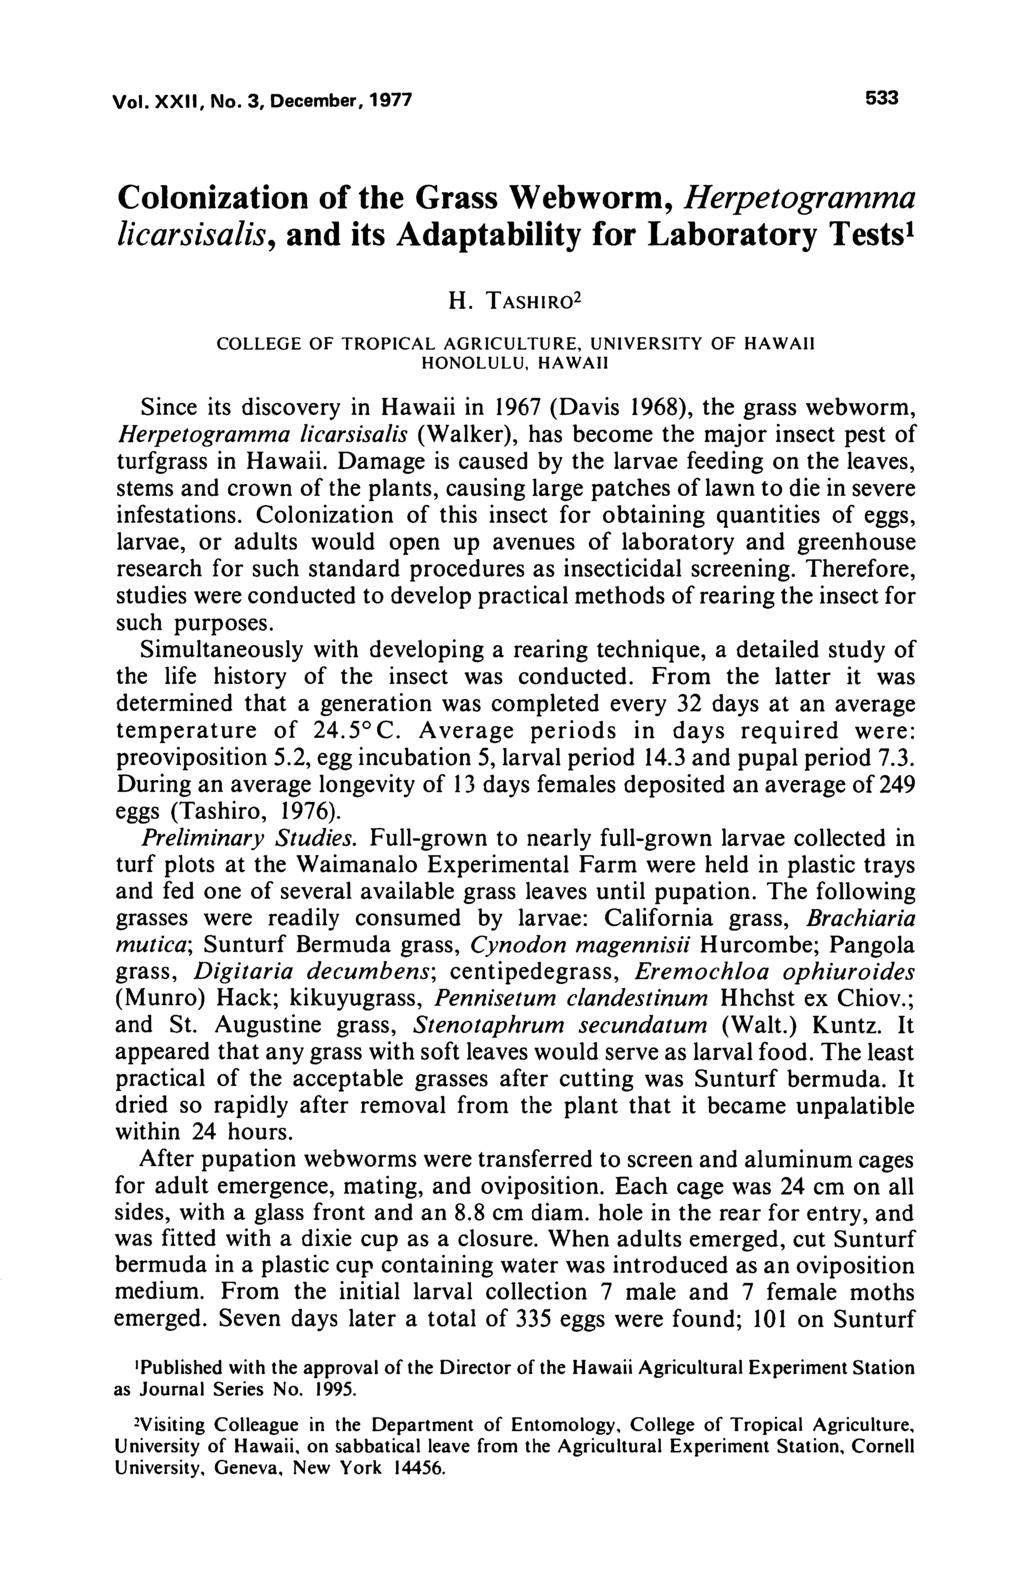 Vol. XXII, No. 3, December, 1977 533 Colonization of the Grass Webworm, Herpetogramma licarsisalis, and its Adaptability for Laboratory Tests1 H.